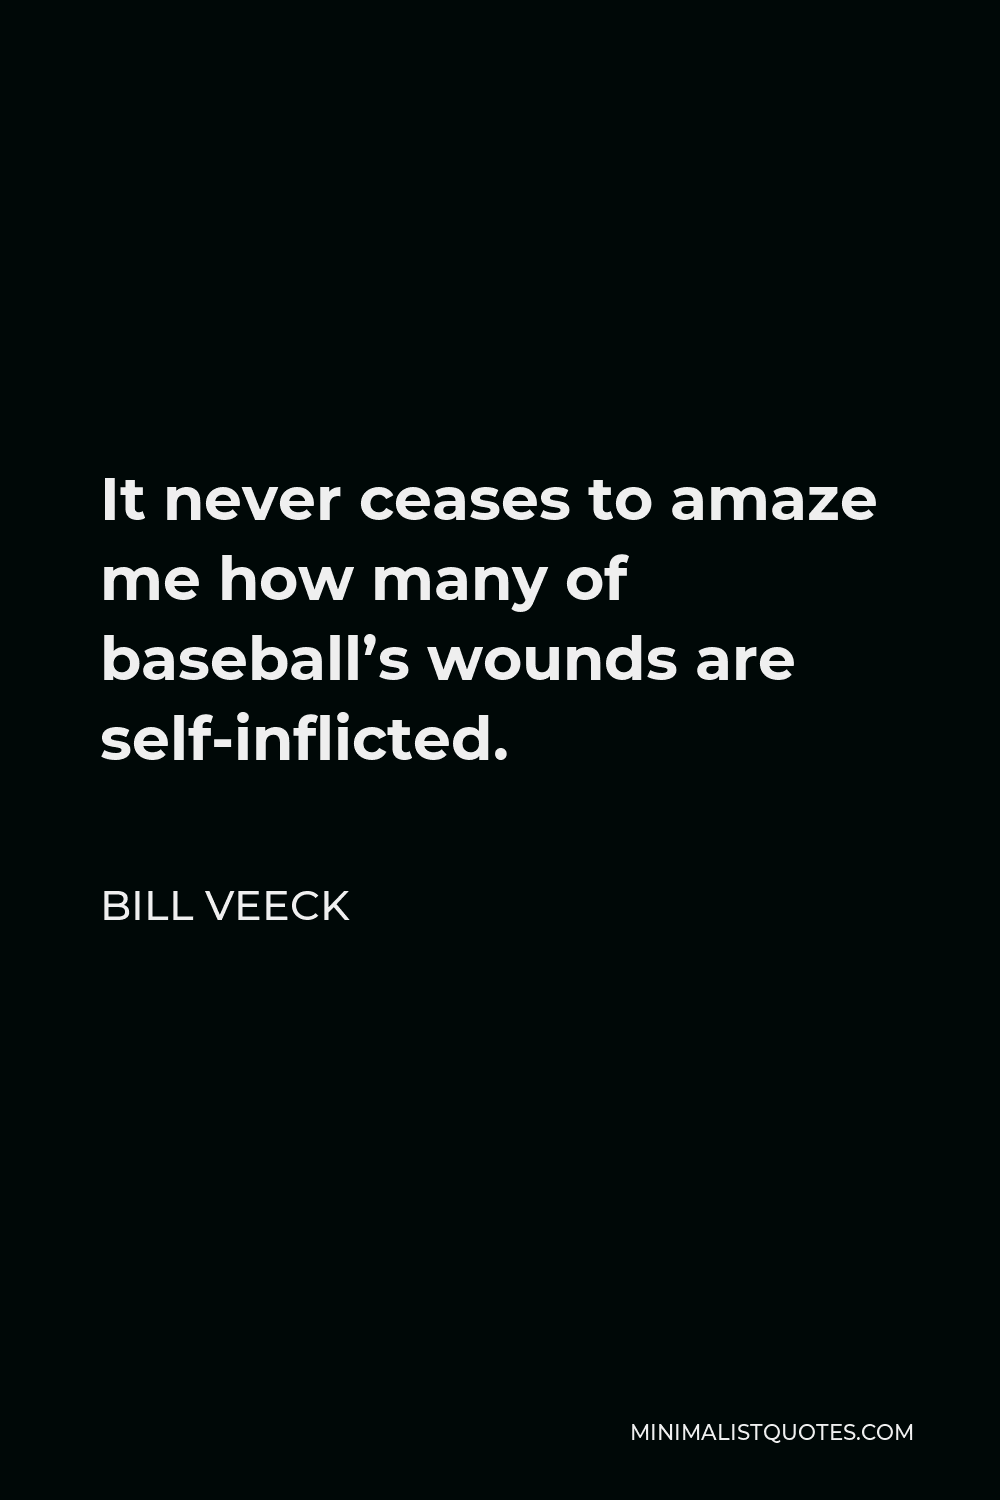 Bill Veeck Quote - It never ceases to amaze me how many of baseball’s wounds are self-inflicted.